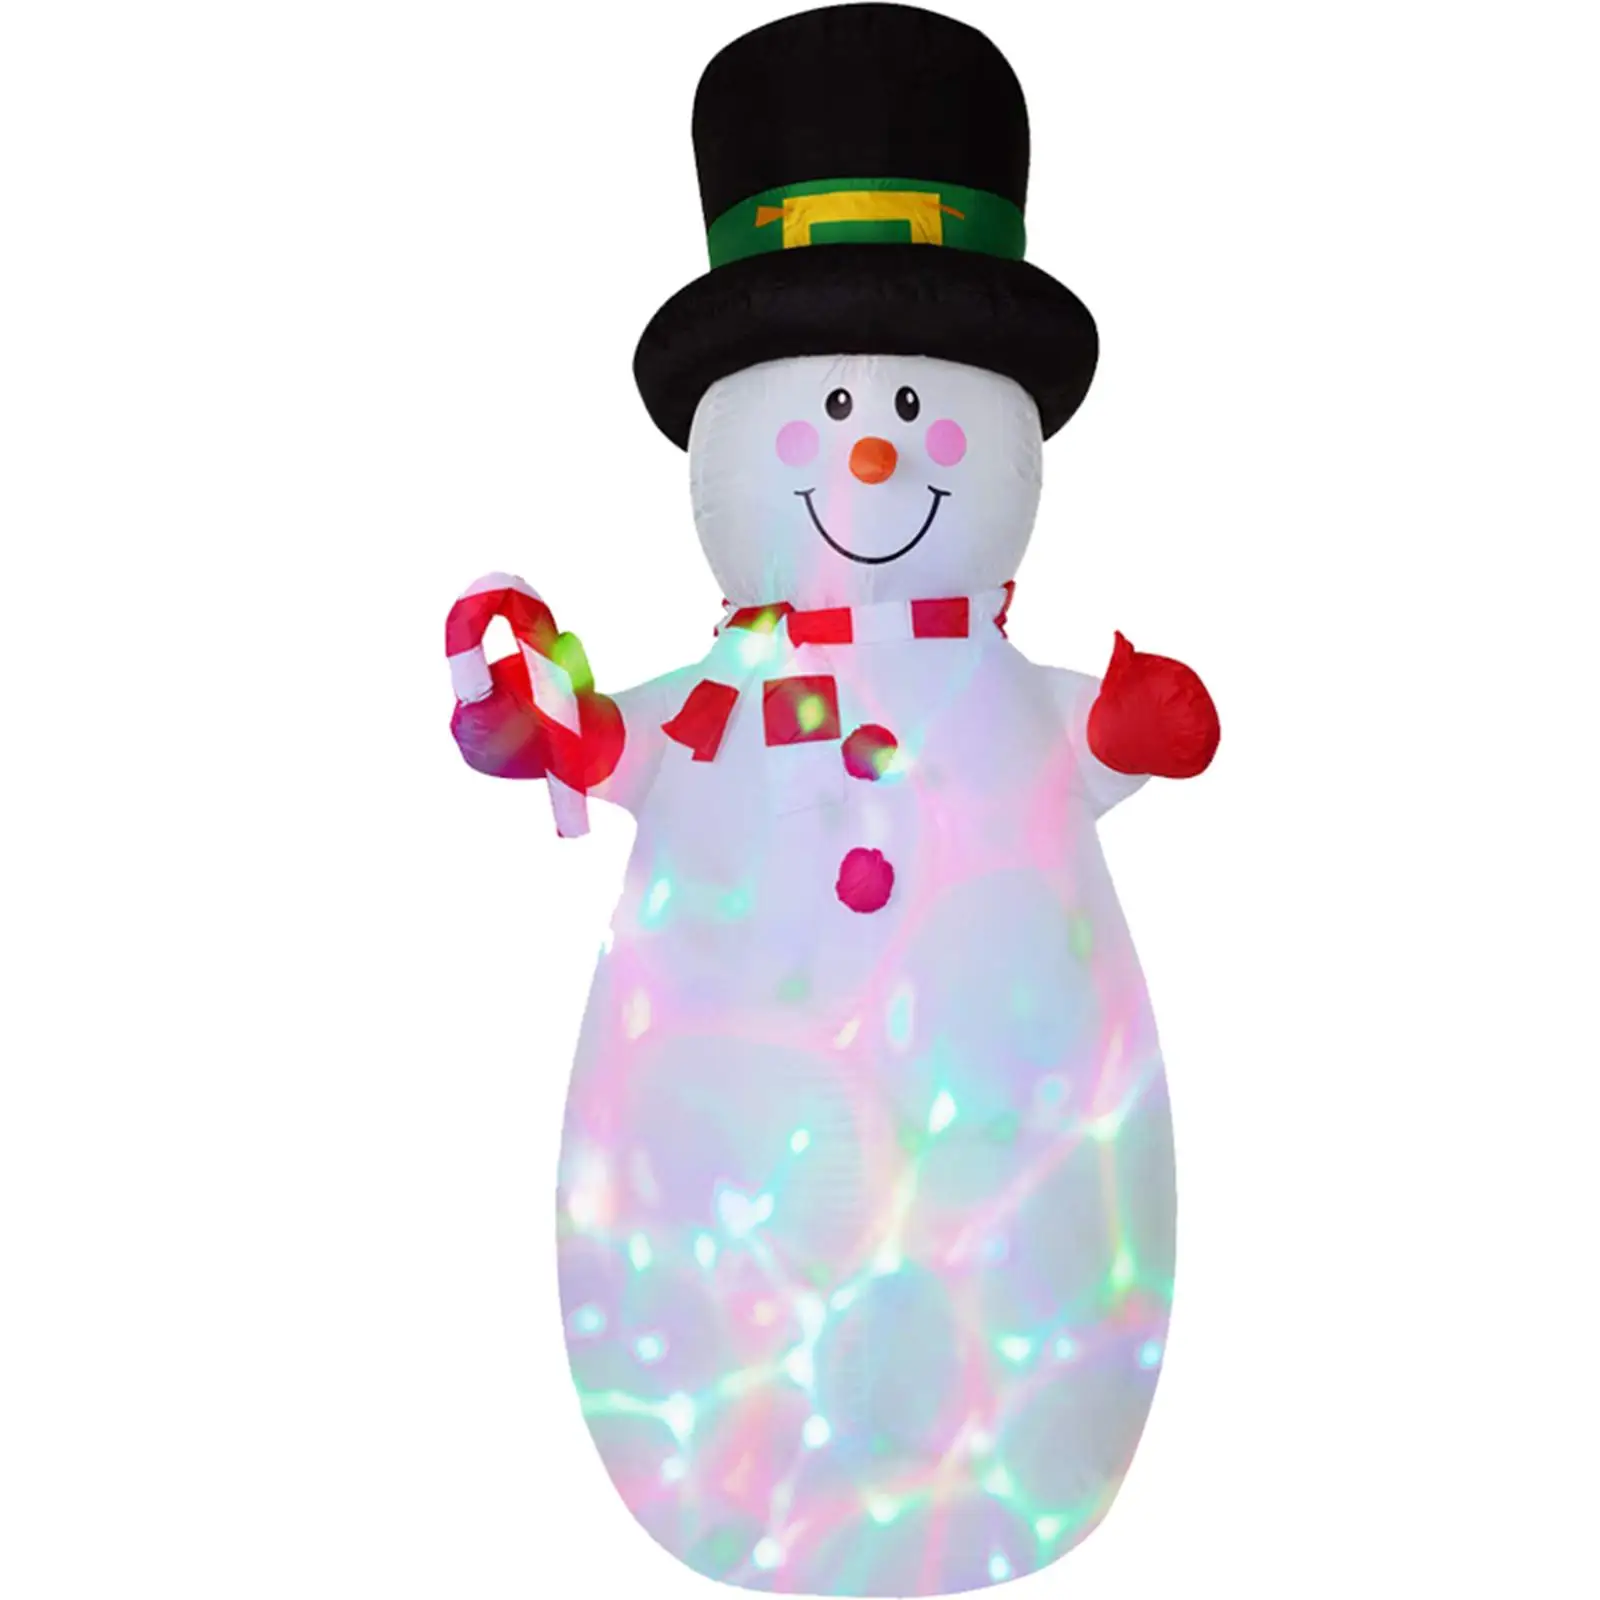 1.8 Meters Xmas Inflatable Snowman with Stakes for Outdoor Holiday Garden Ornament